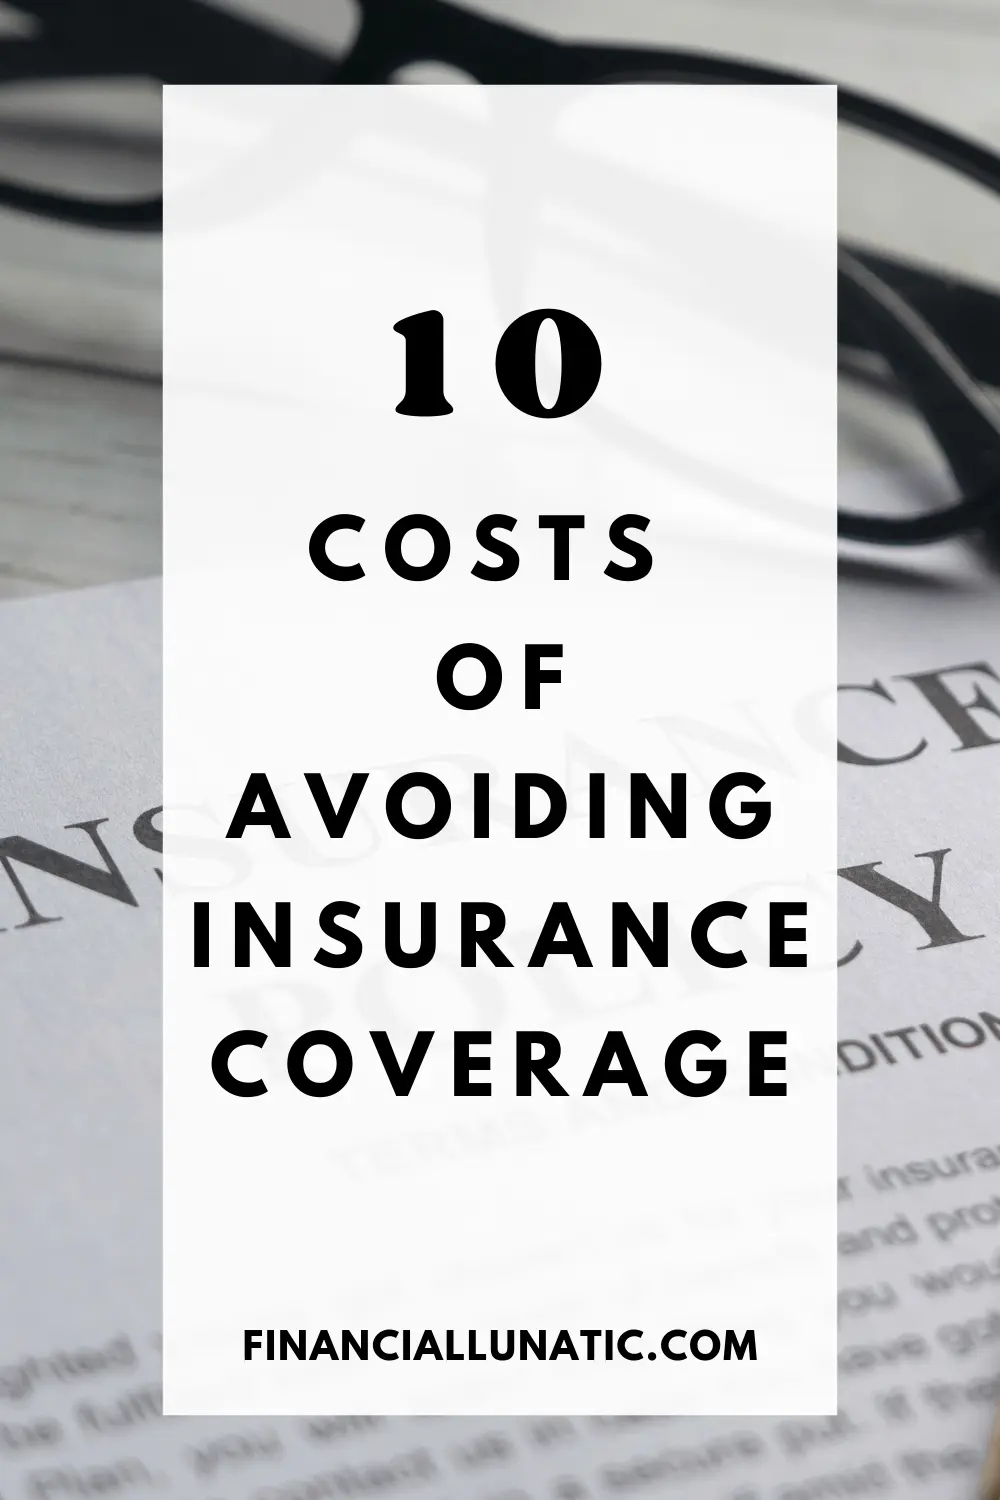 what is one cost of avoiding insurance